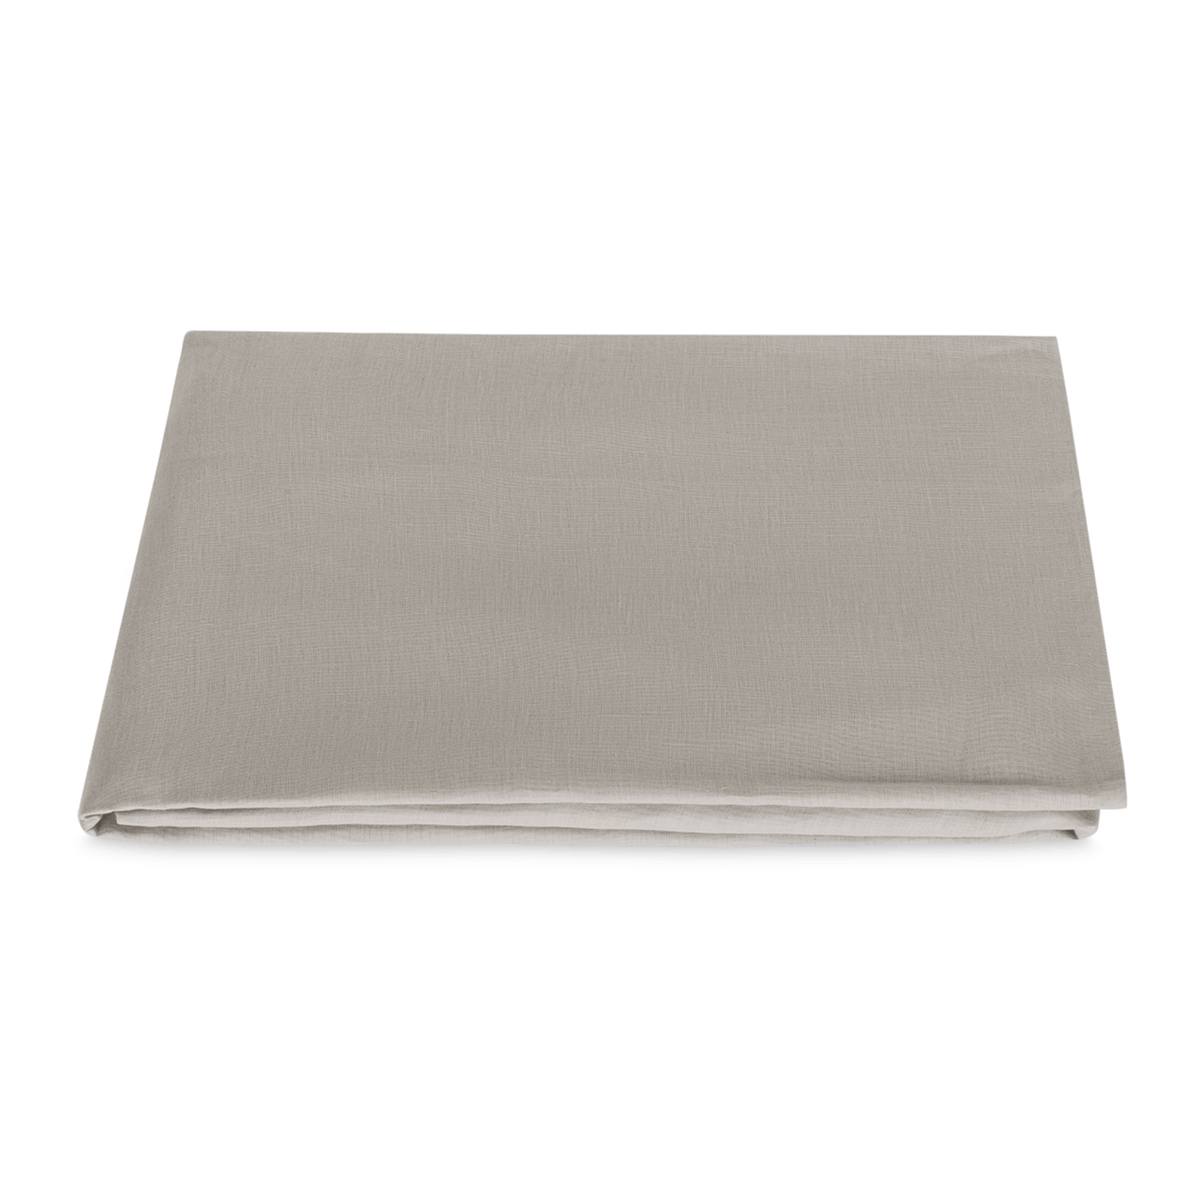 Folded Fitted Sheet of Matouk Roman Hemstitch Bedding Color Platinum